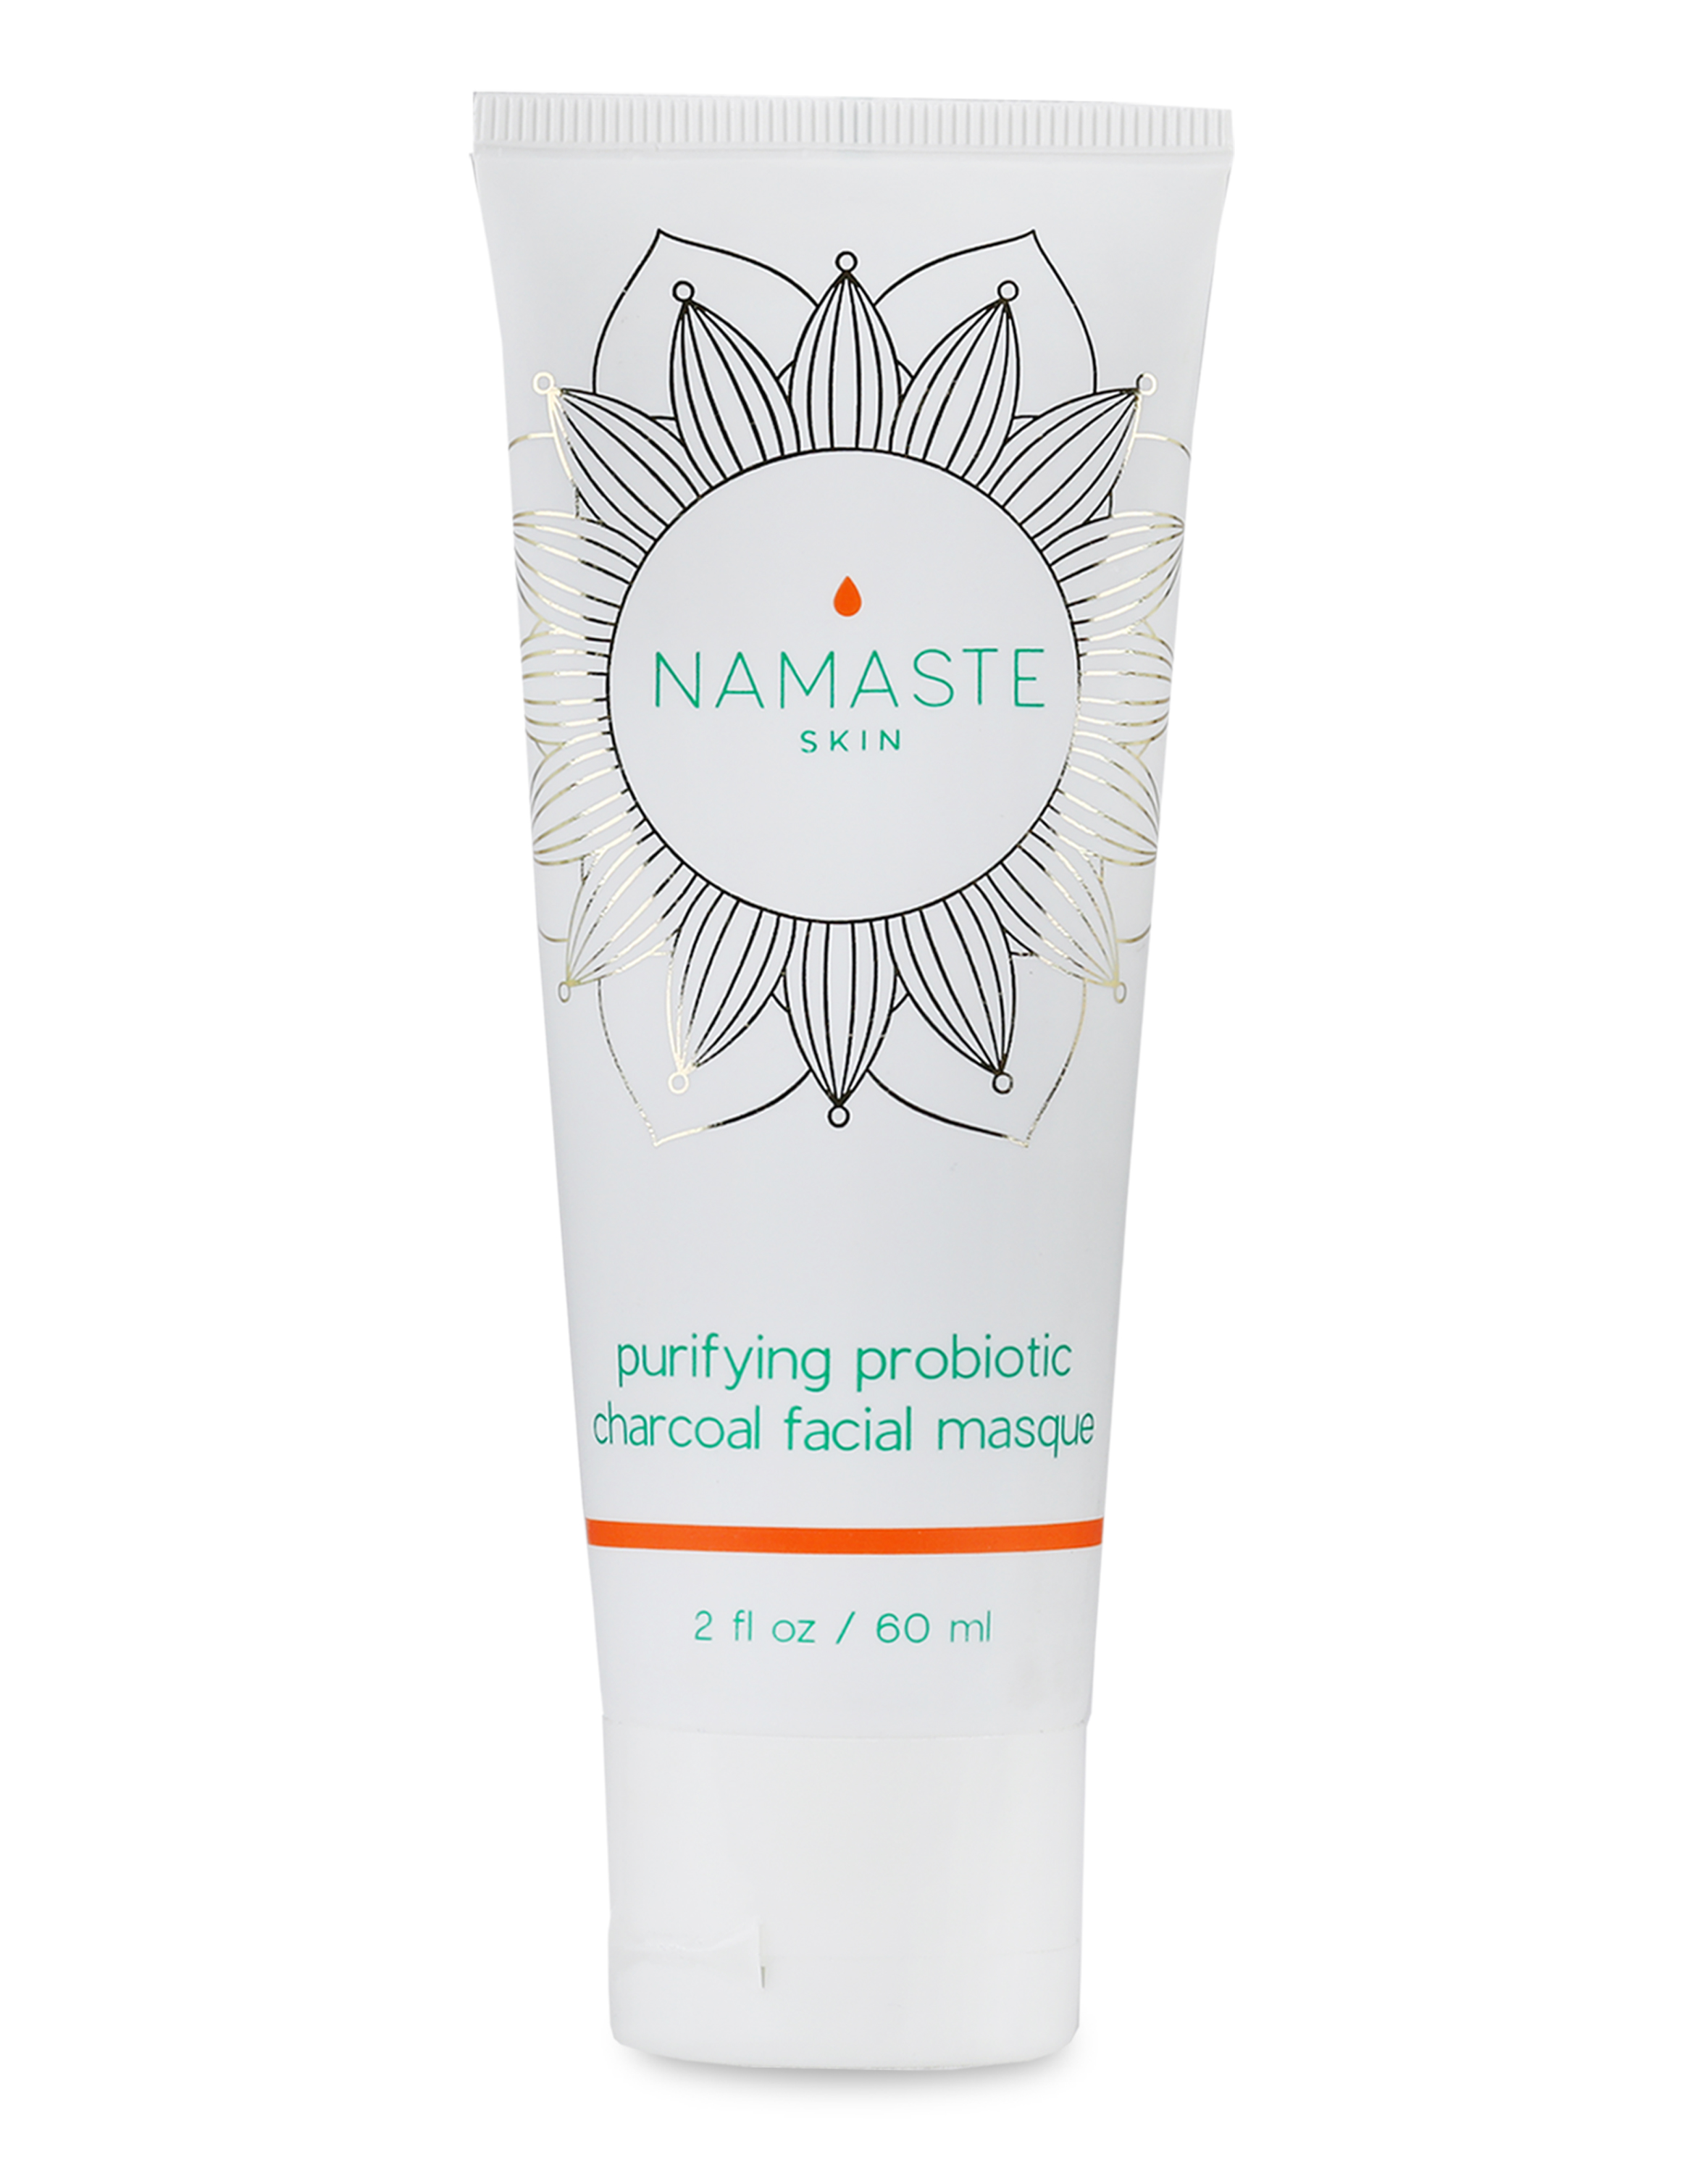 Namaste Skin Purifying Probiotic Charcoal Facial Masque for Skin Tightening, Hydration and Pore Reduction. Reduce Redness and get Silky Smooth Feel; Cruelty-Free, Vegan- 60ml Tube - 2oz - image 1 of 1